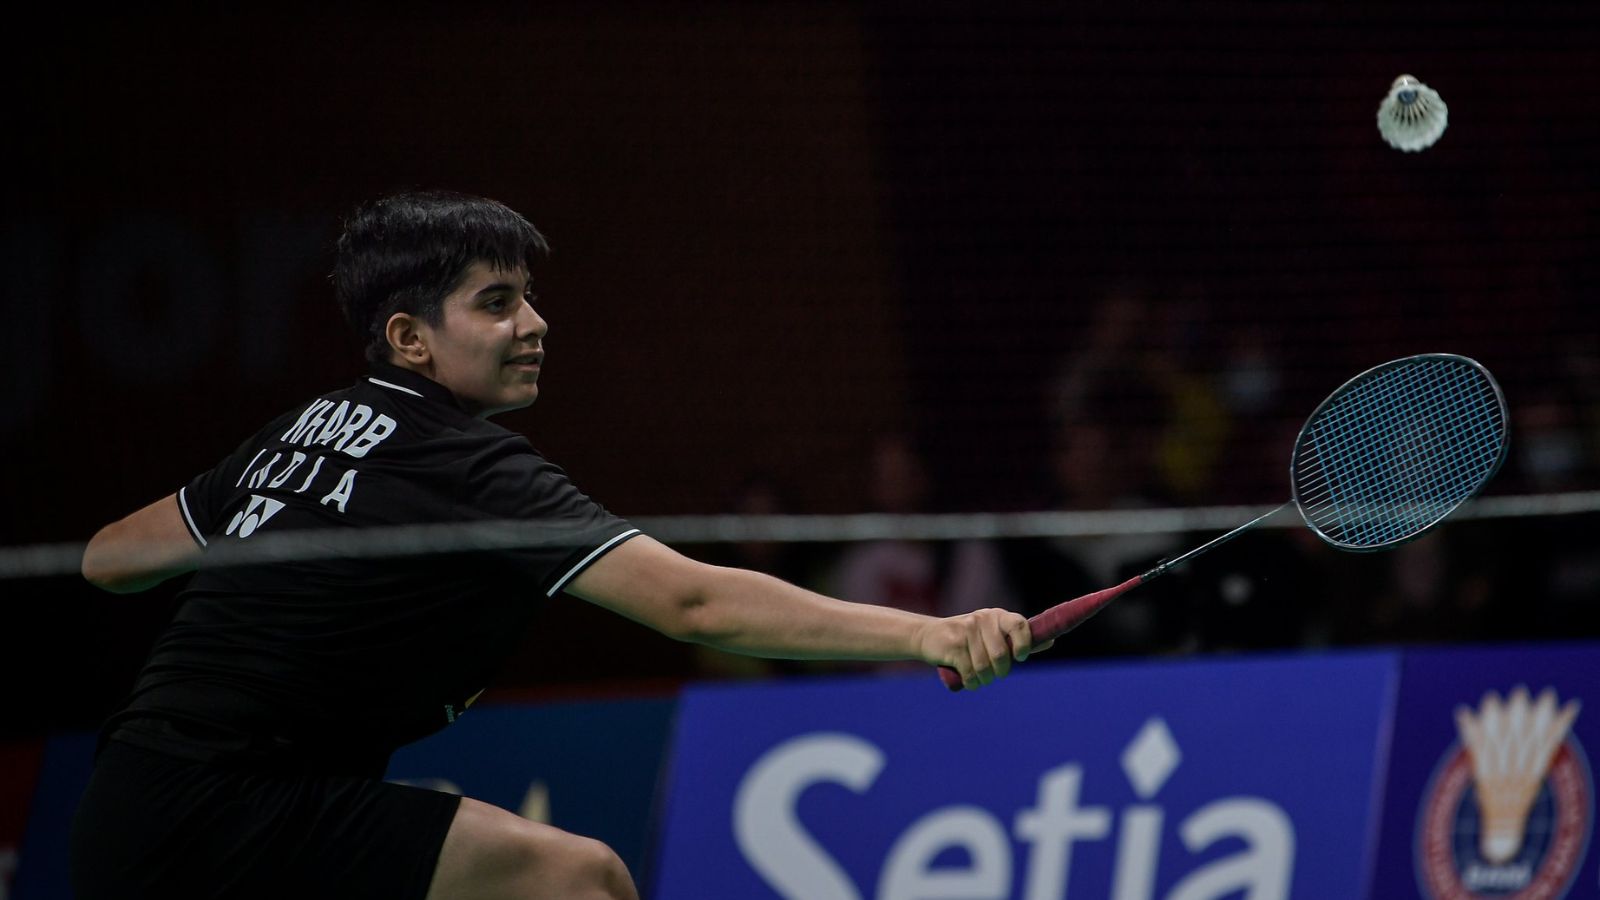 android, badminton: how anmol kharb, india’s precious new talent, delivered a famous asian gold unfazed and with a smile on her face